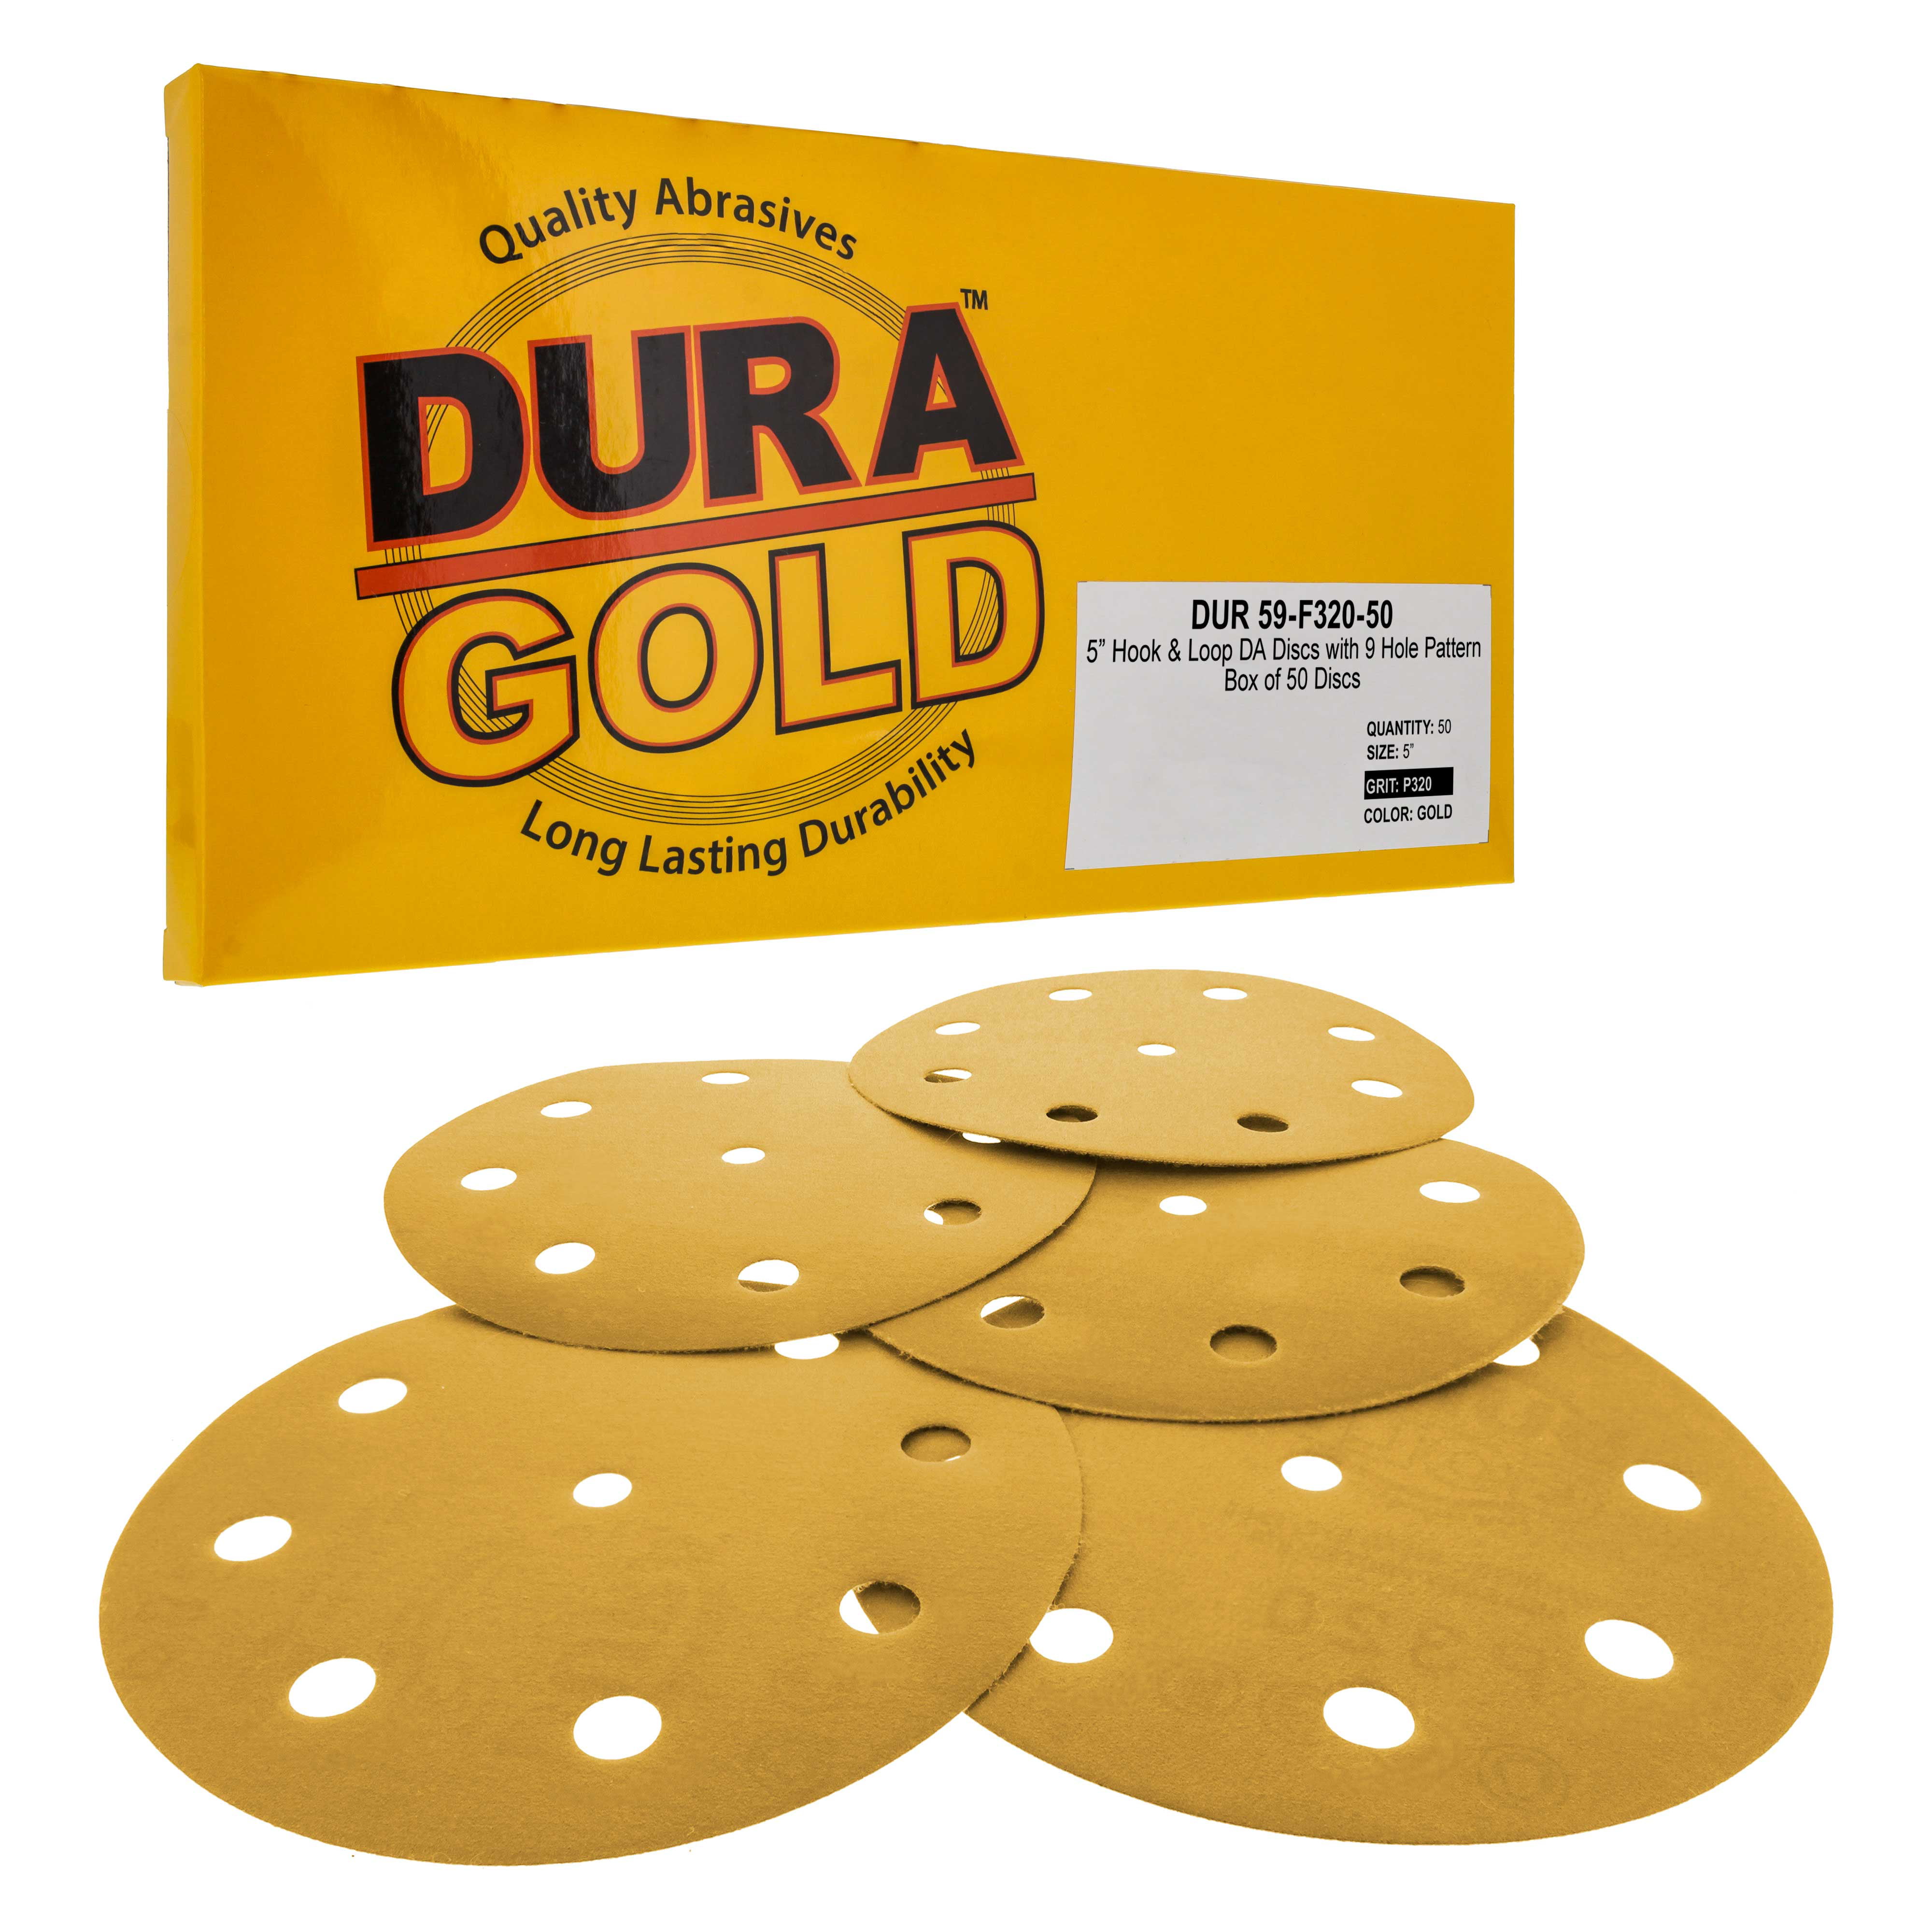 Premium Film Back Variety/Assortment Pack 6 Green Film PSA Self Adhesive Stickyback Sanding Discs 5 of Each grit 80, 120, 220, 320, 400 - Box of 25 Total Sandpaper Finishing Discs Dura-Gold 